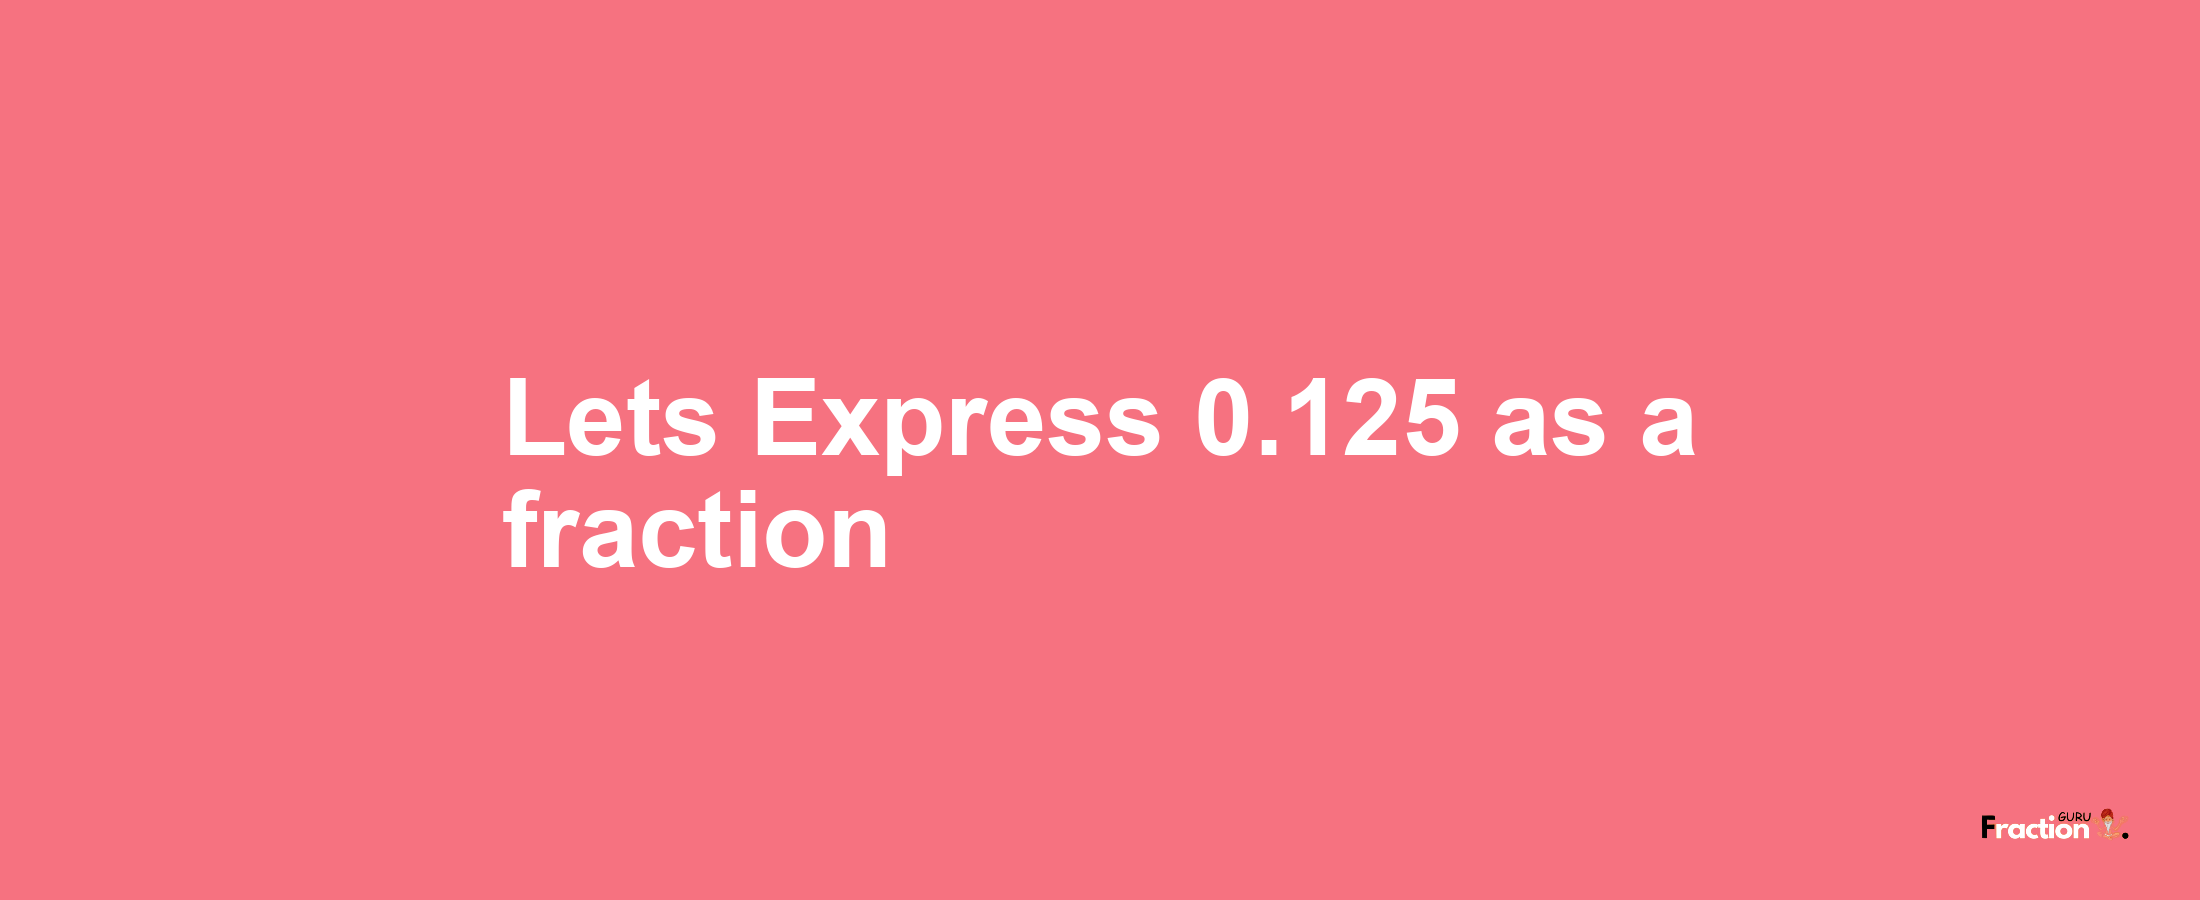 Lets Express 0.125 as afraction